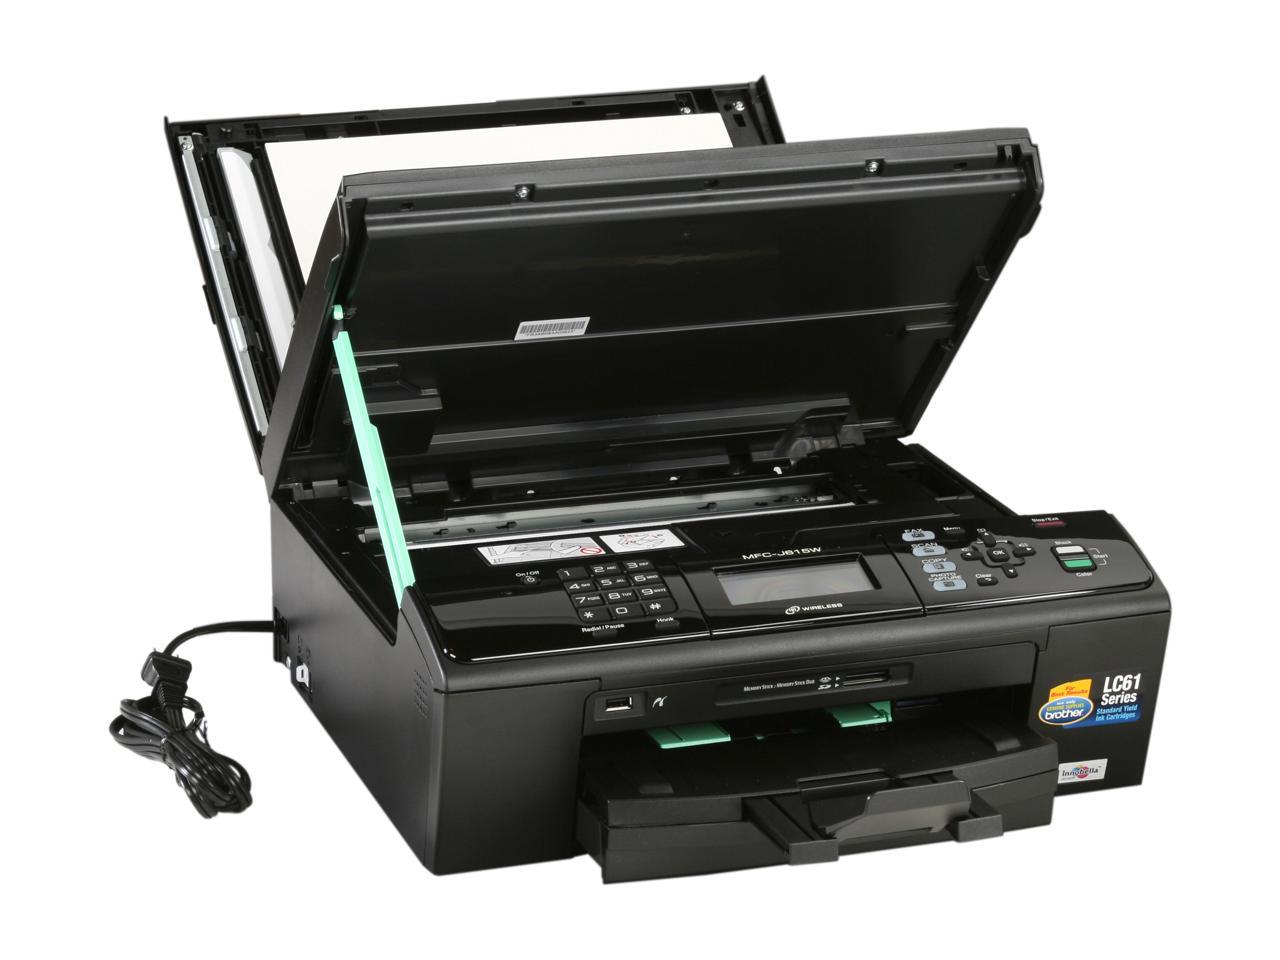 Brother Professional Series MFC-J615W Inkjet All-in-One Printer with up